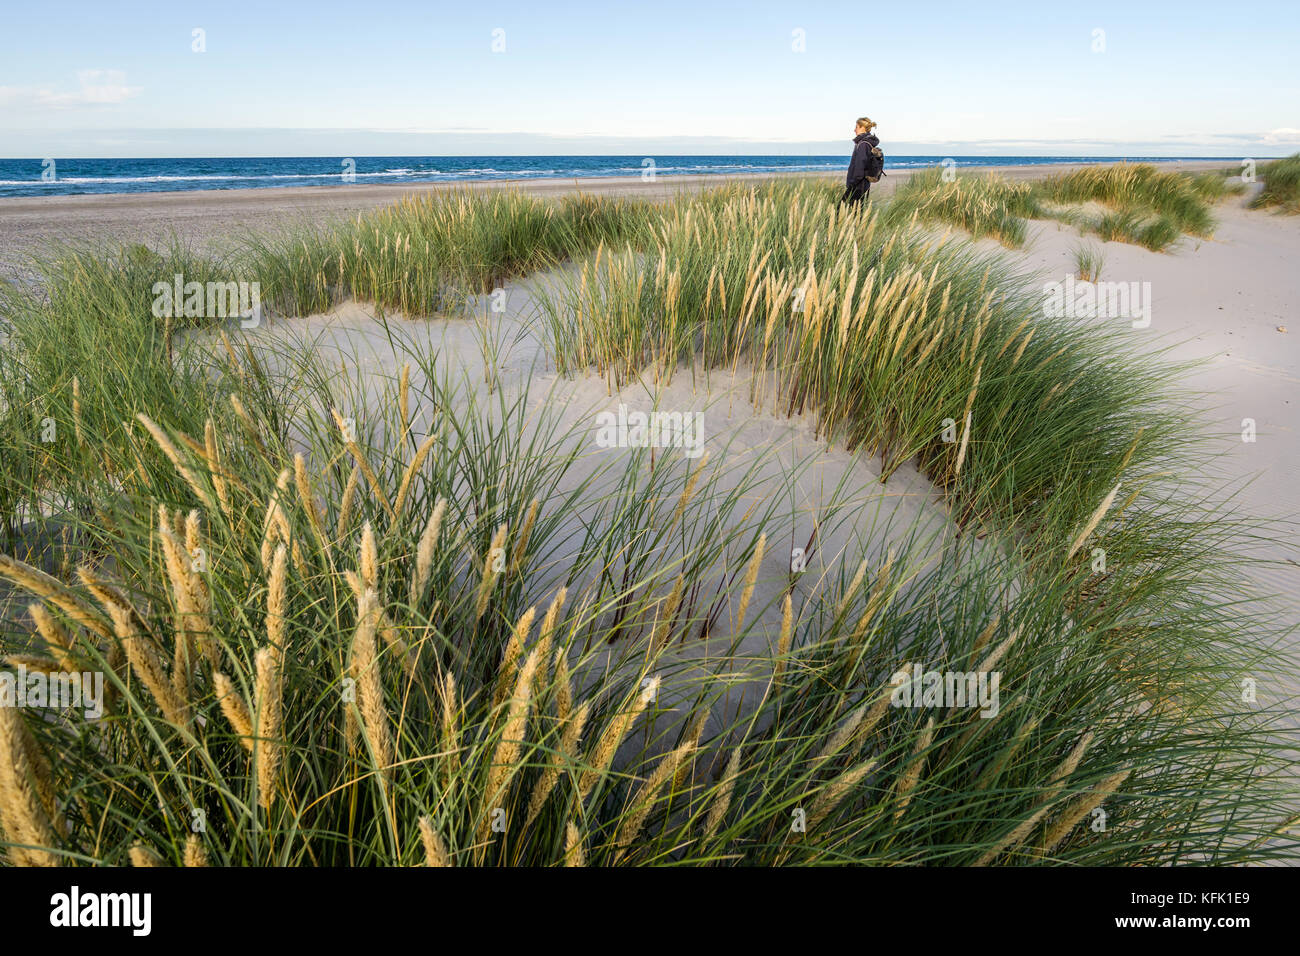 Young woman hiking in coastal dune grass at beach of North Sea. Stock Photo